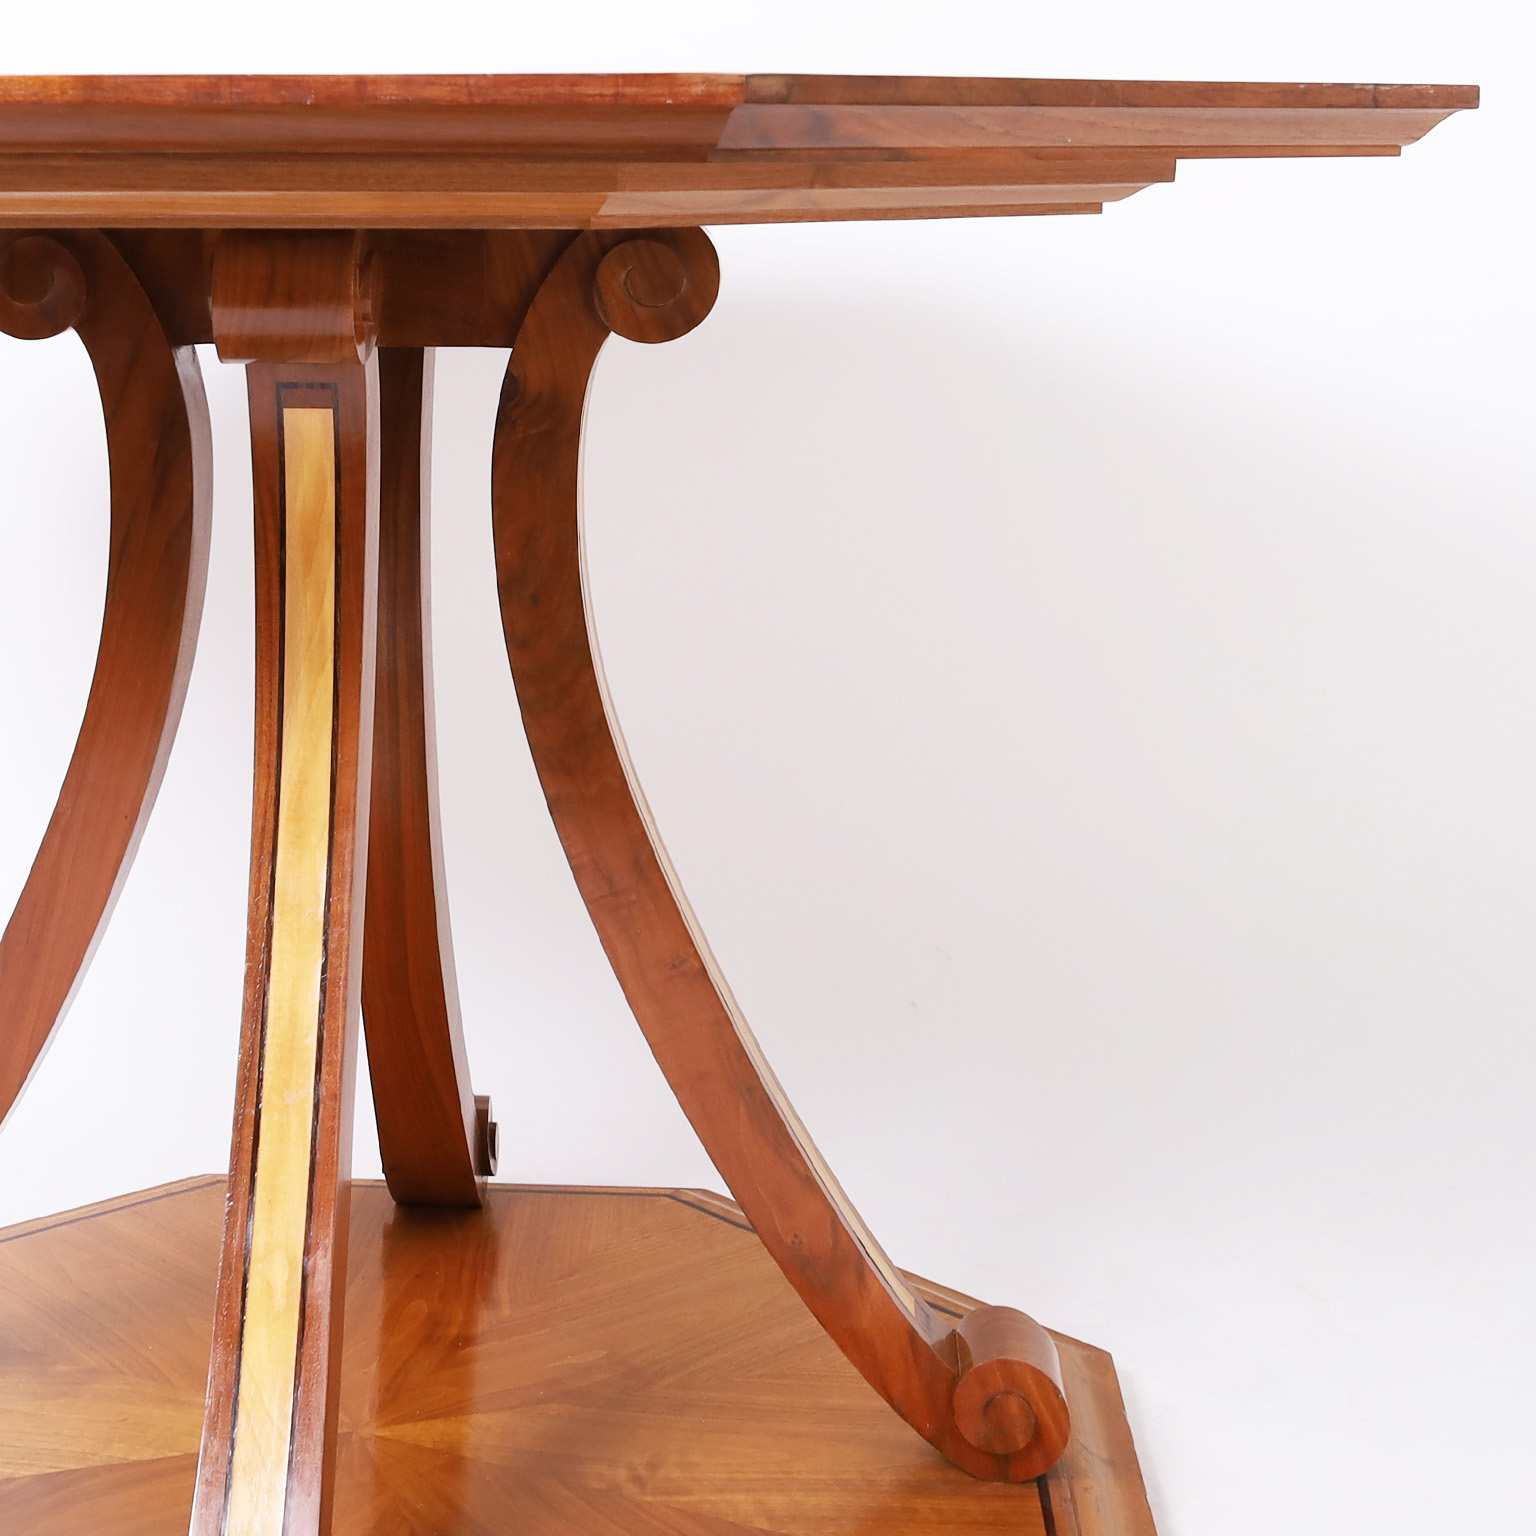 Inlaid British Colonial Style Center Table by David Linley